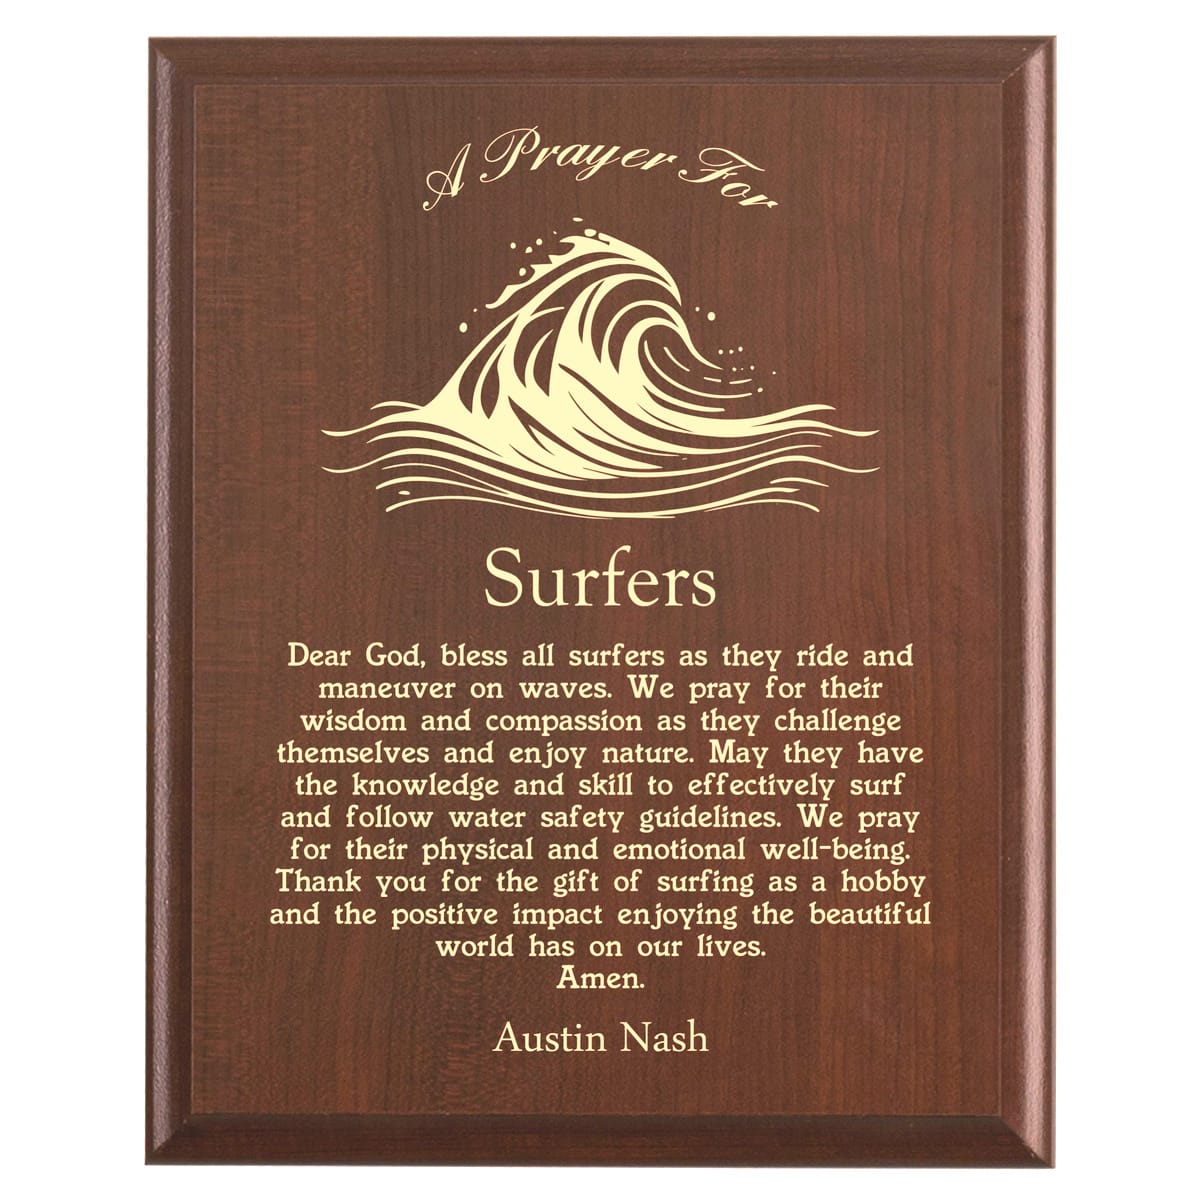 Plaque photo: Surfer Prayer Plaque design with free personalization. Wood style finish with customized text.